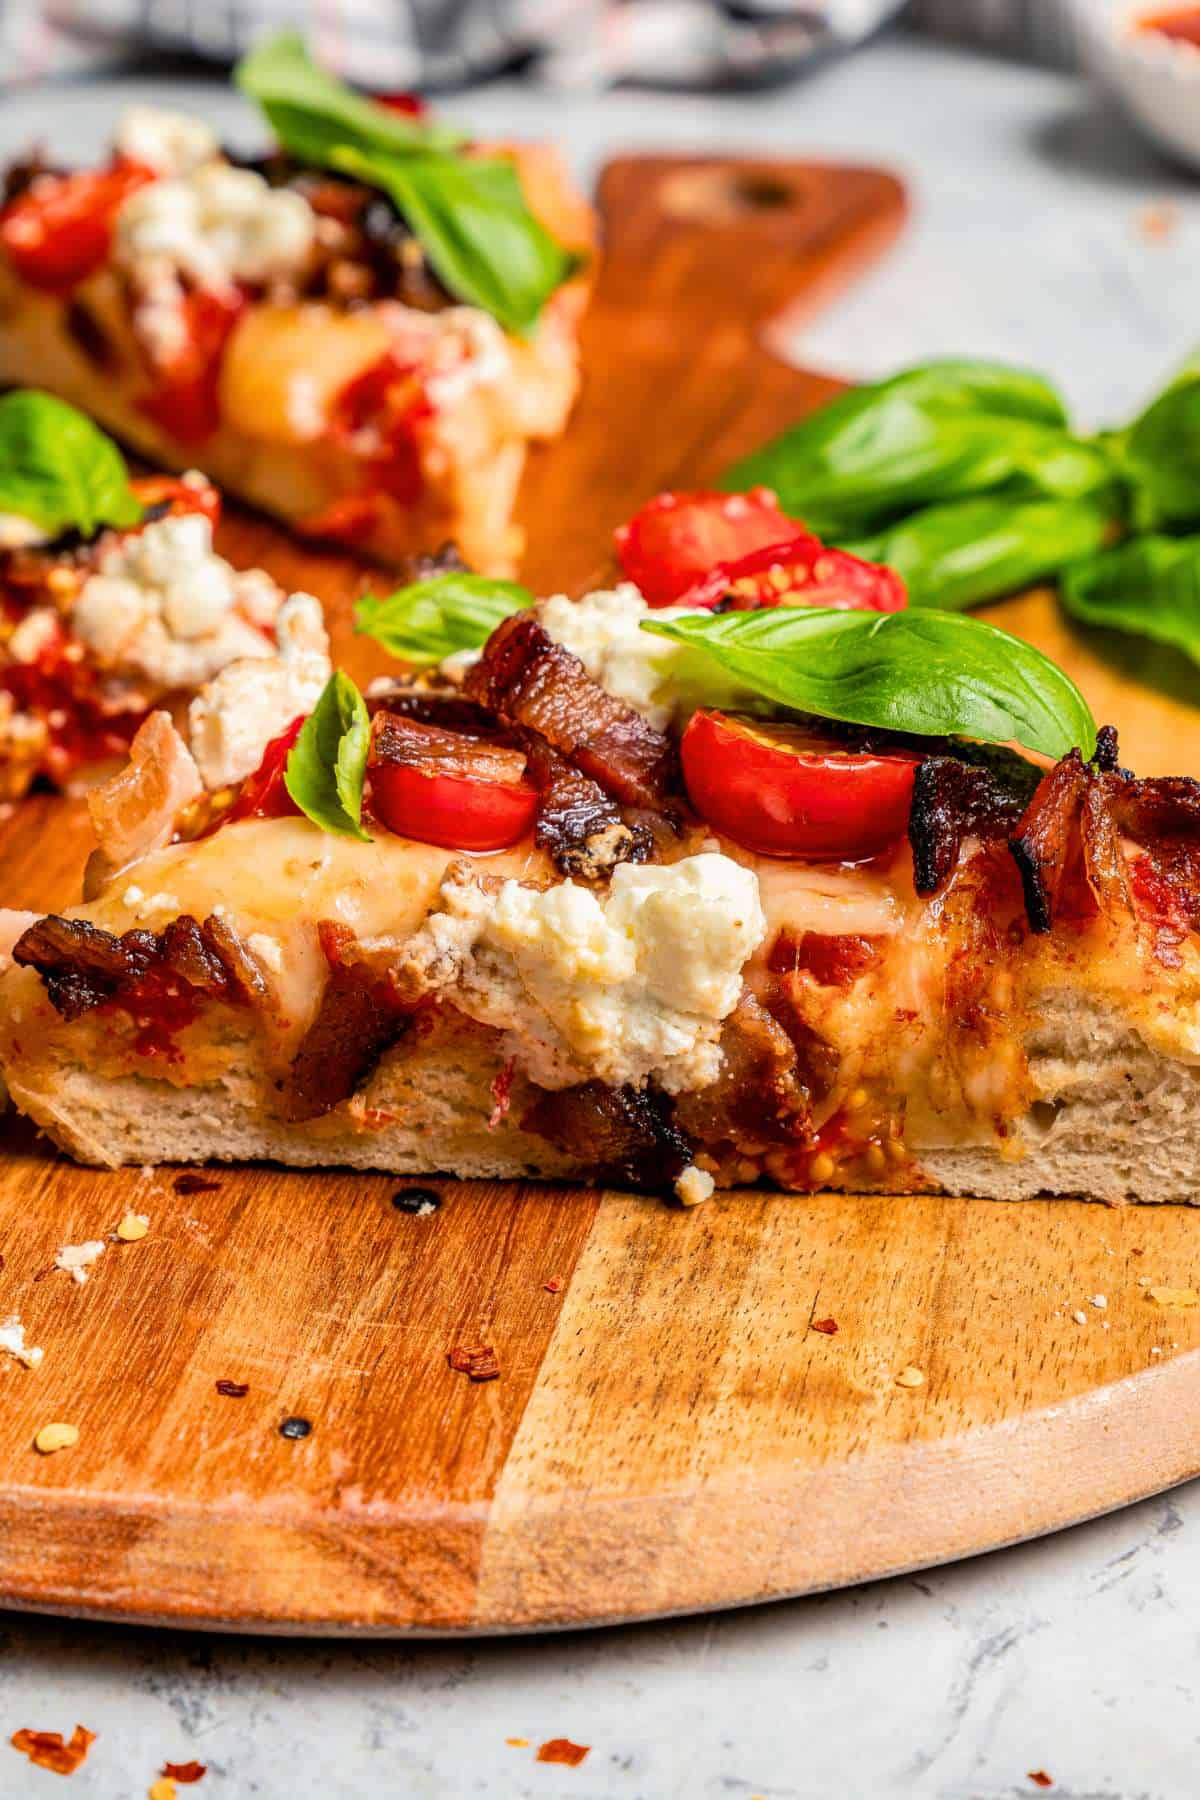 A slice of pizza topped with goat cheese, cherry tomatoes, and fresh basil leaves, and set on a wooden board.